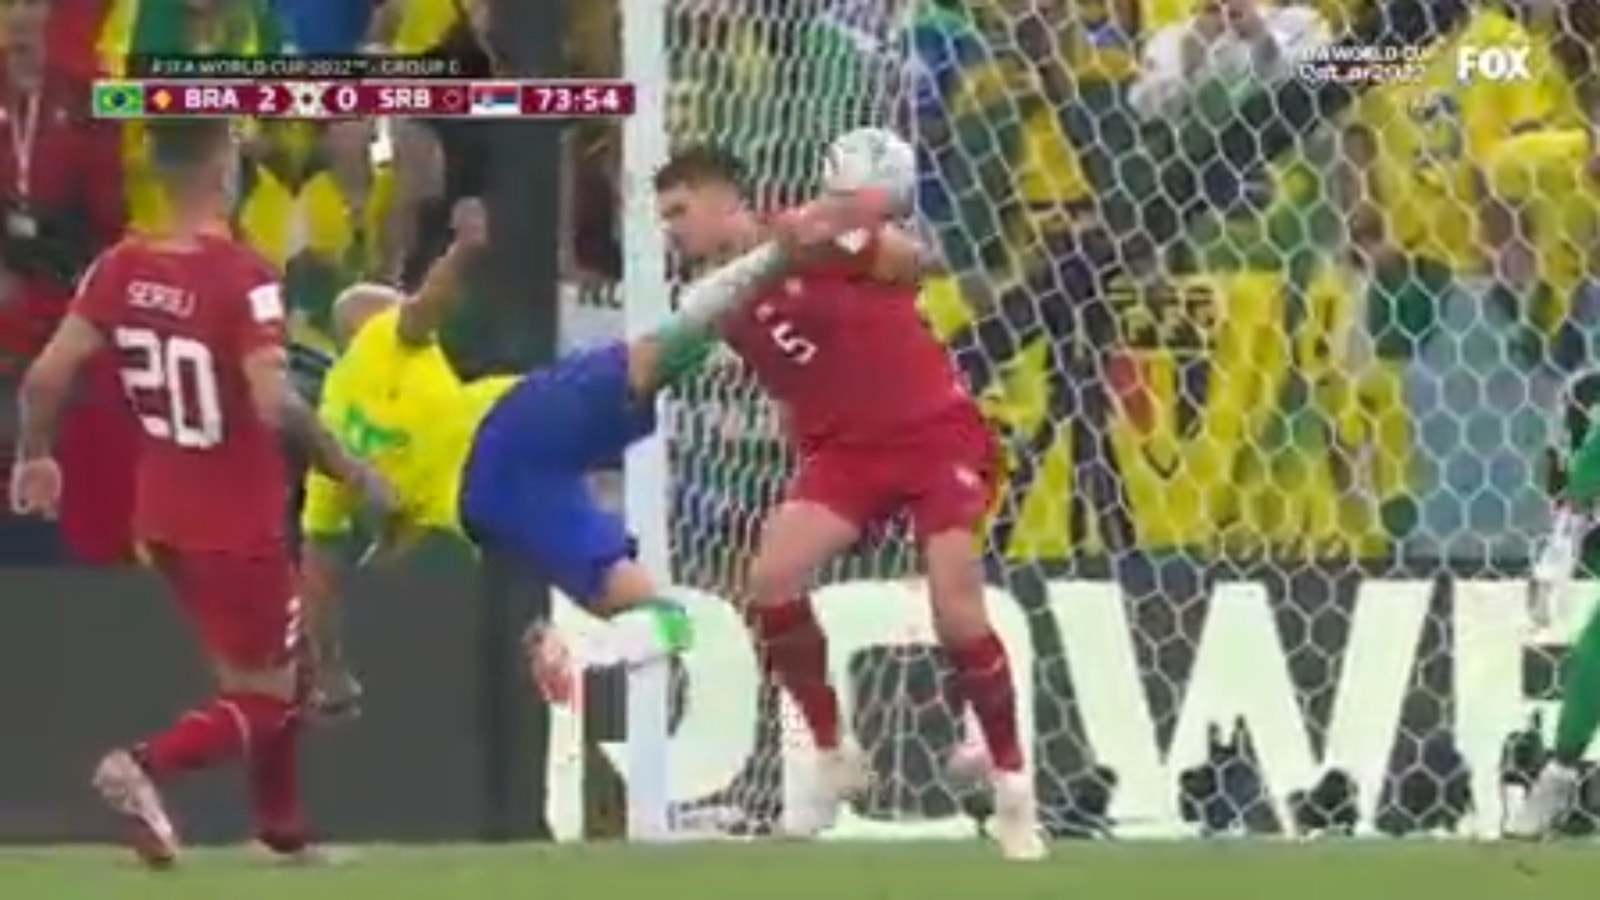 Richarlison gave Brazil a 2-0 lead with an acrobatic goal in the 73rd minute.